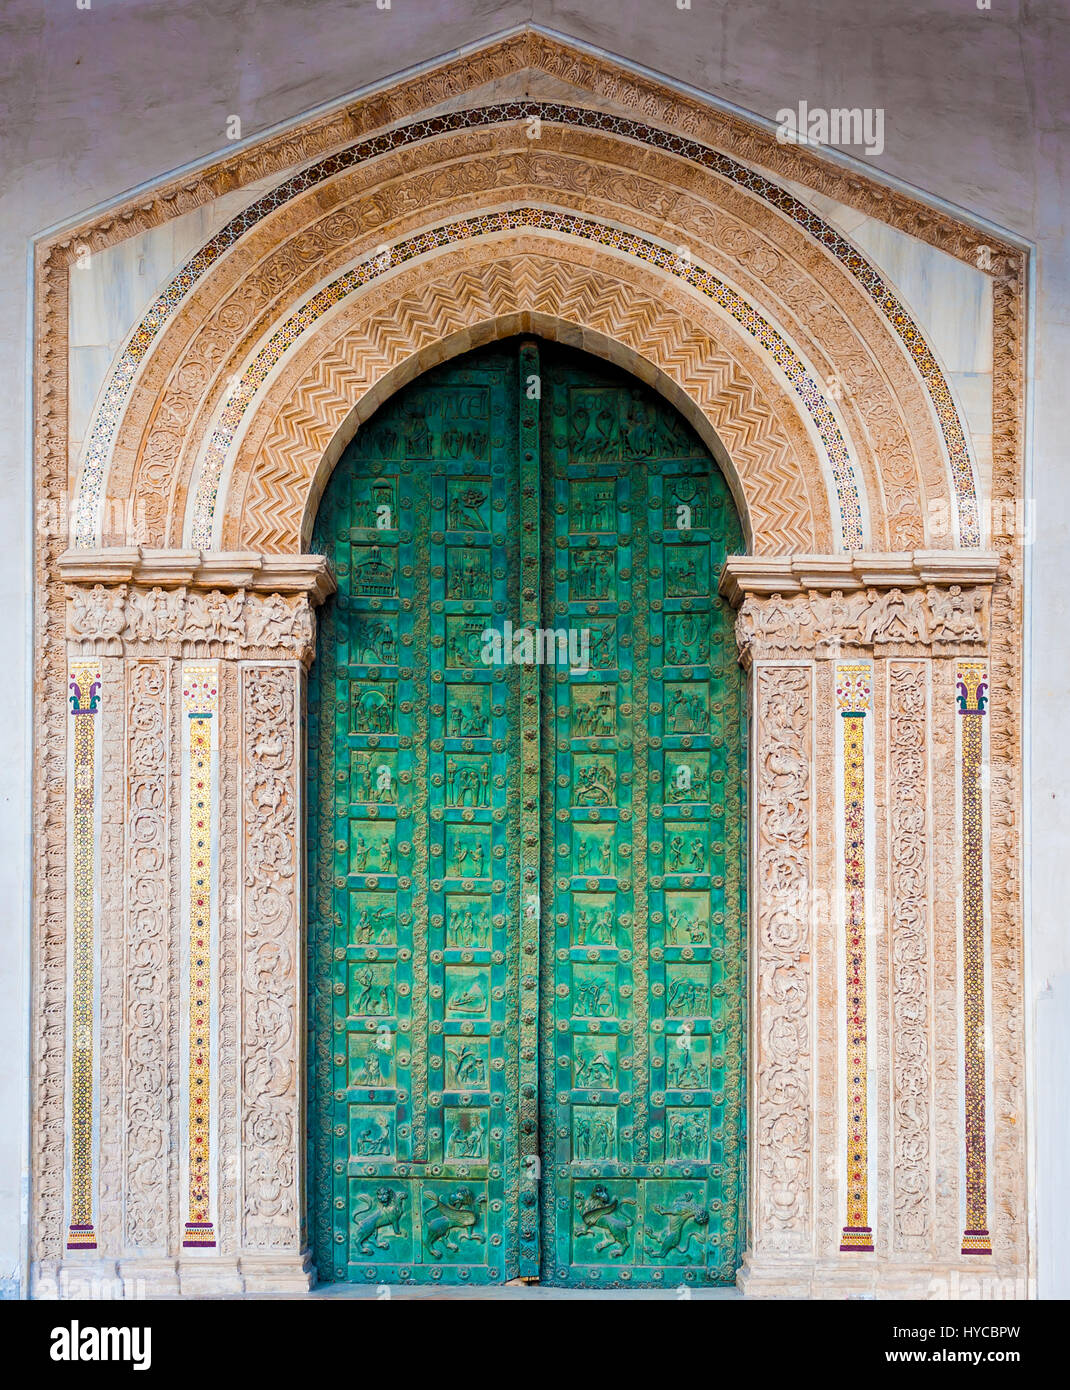 bronze door, the facade of the cathedral of Monreale, Sicily - Italy Stock Photo